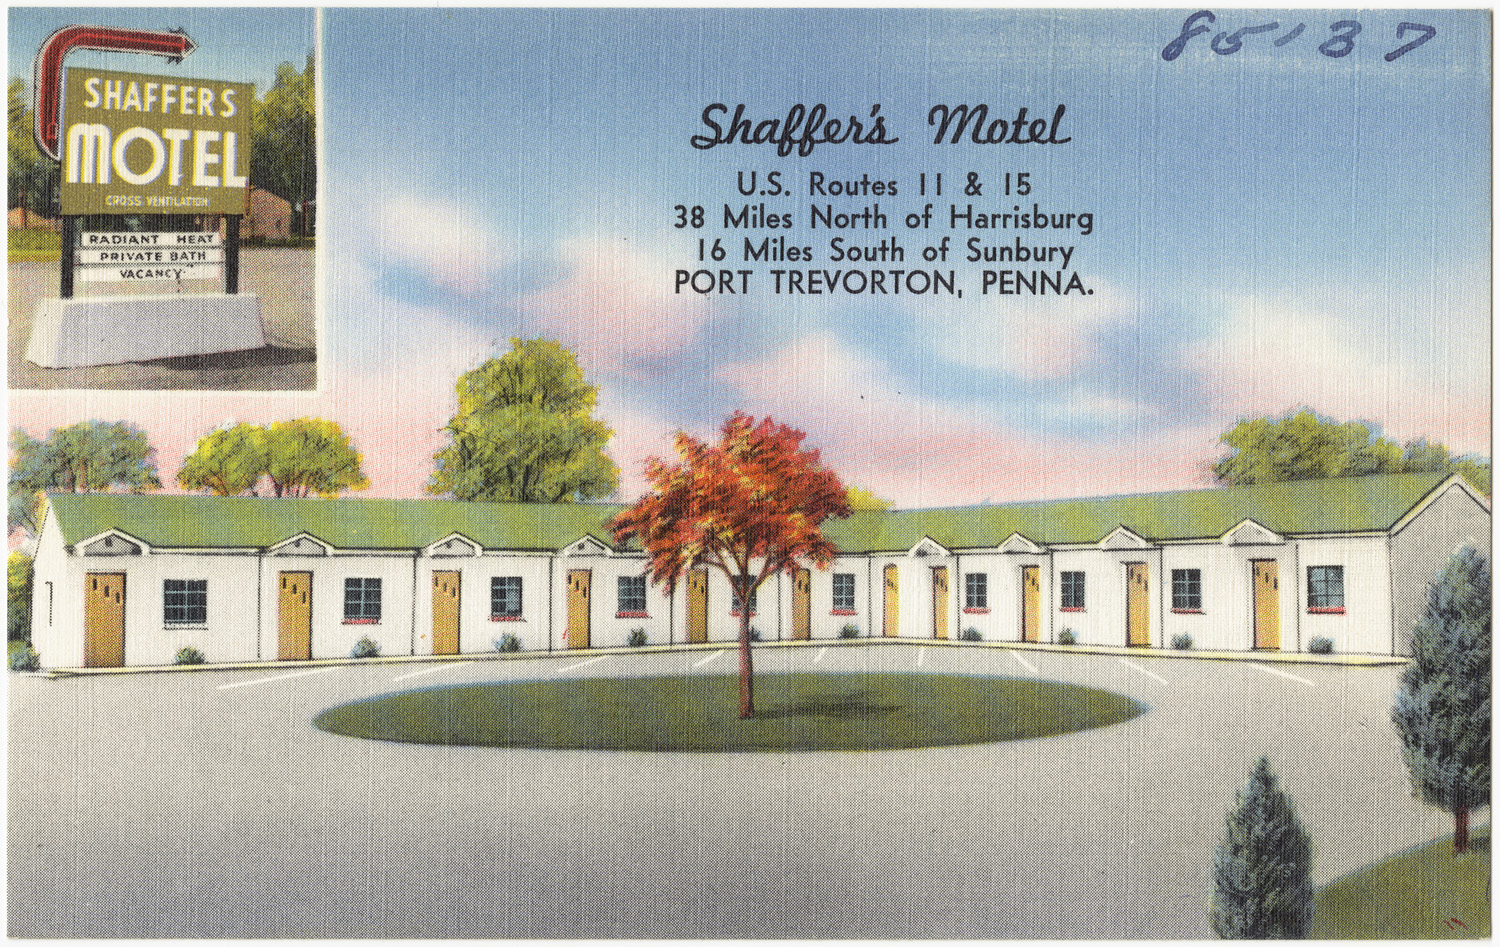 a drawing showing the rear of a motel, with a large green tree in front of the el